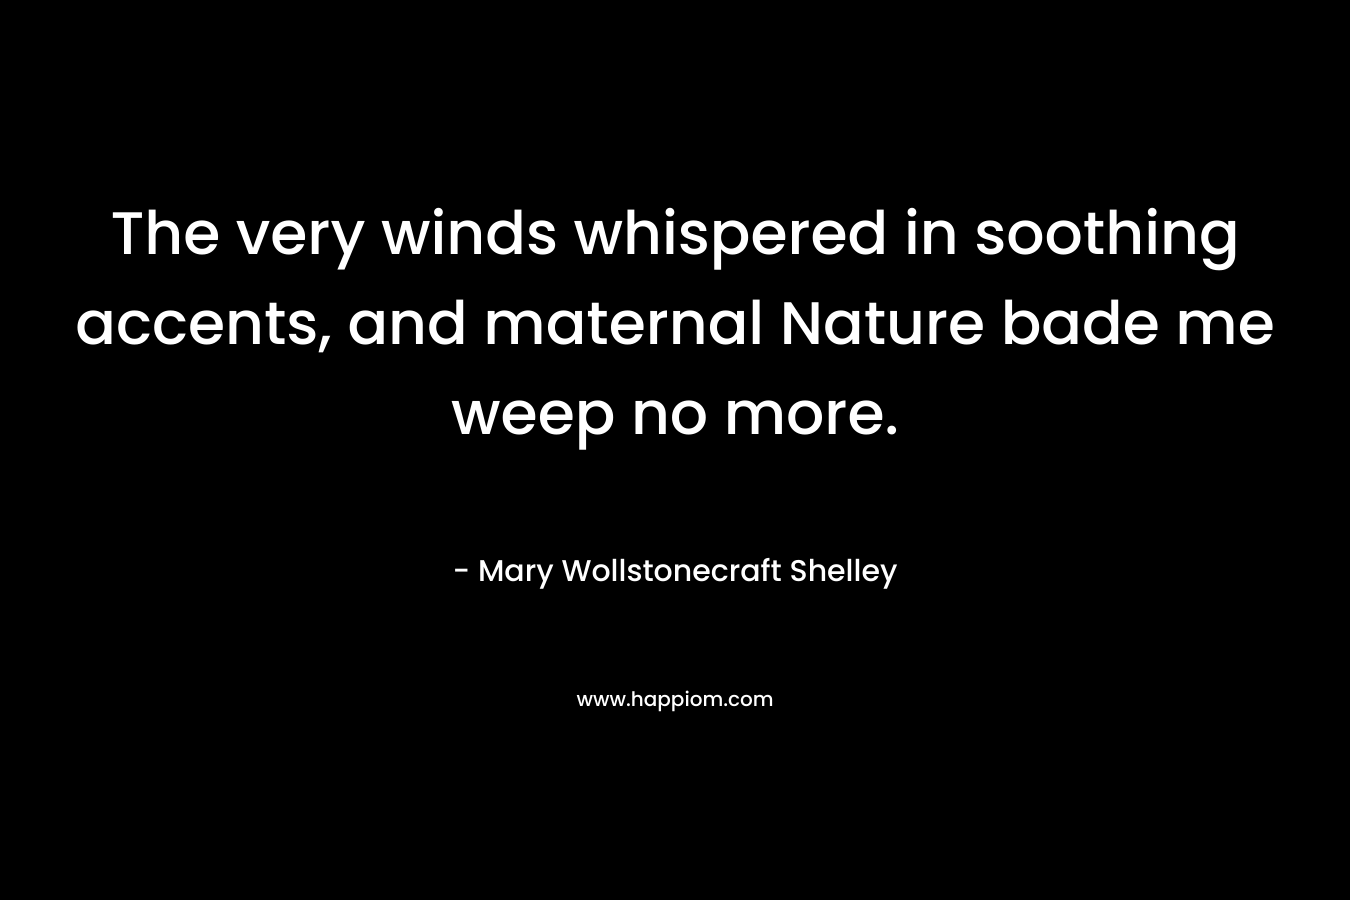 The very winds whispered in soothing accents, and maternal Nature bade me weep no more. – Mary Wollstonecraft Shelley